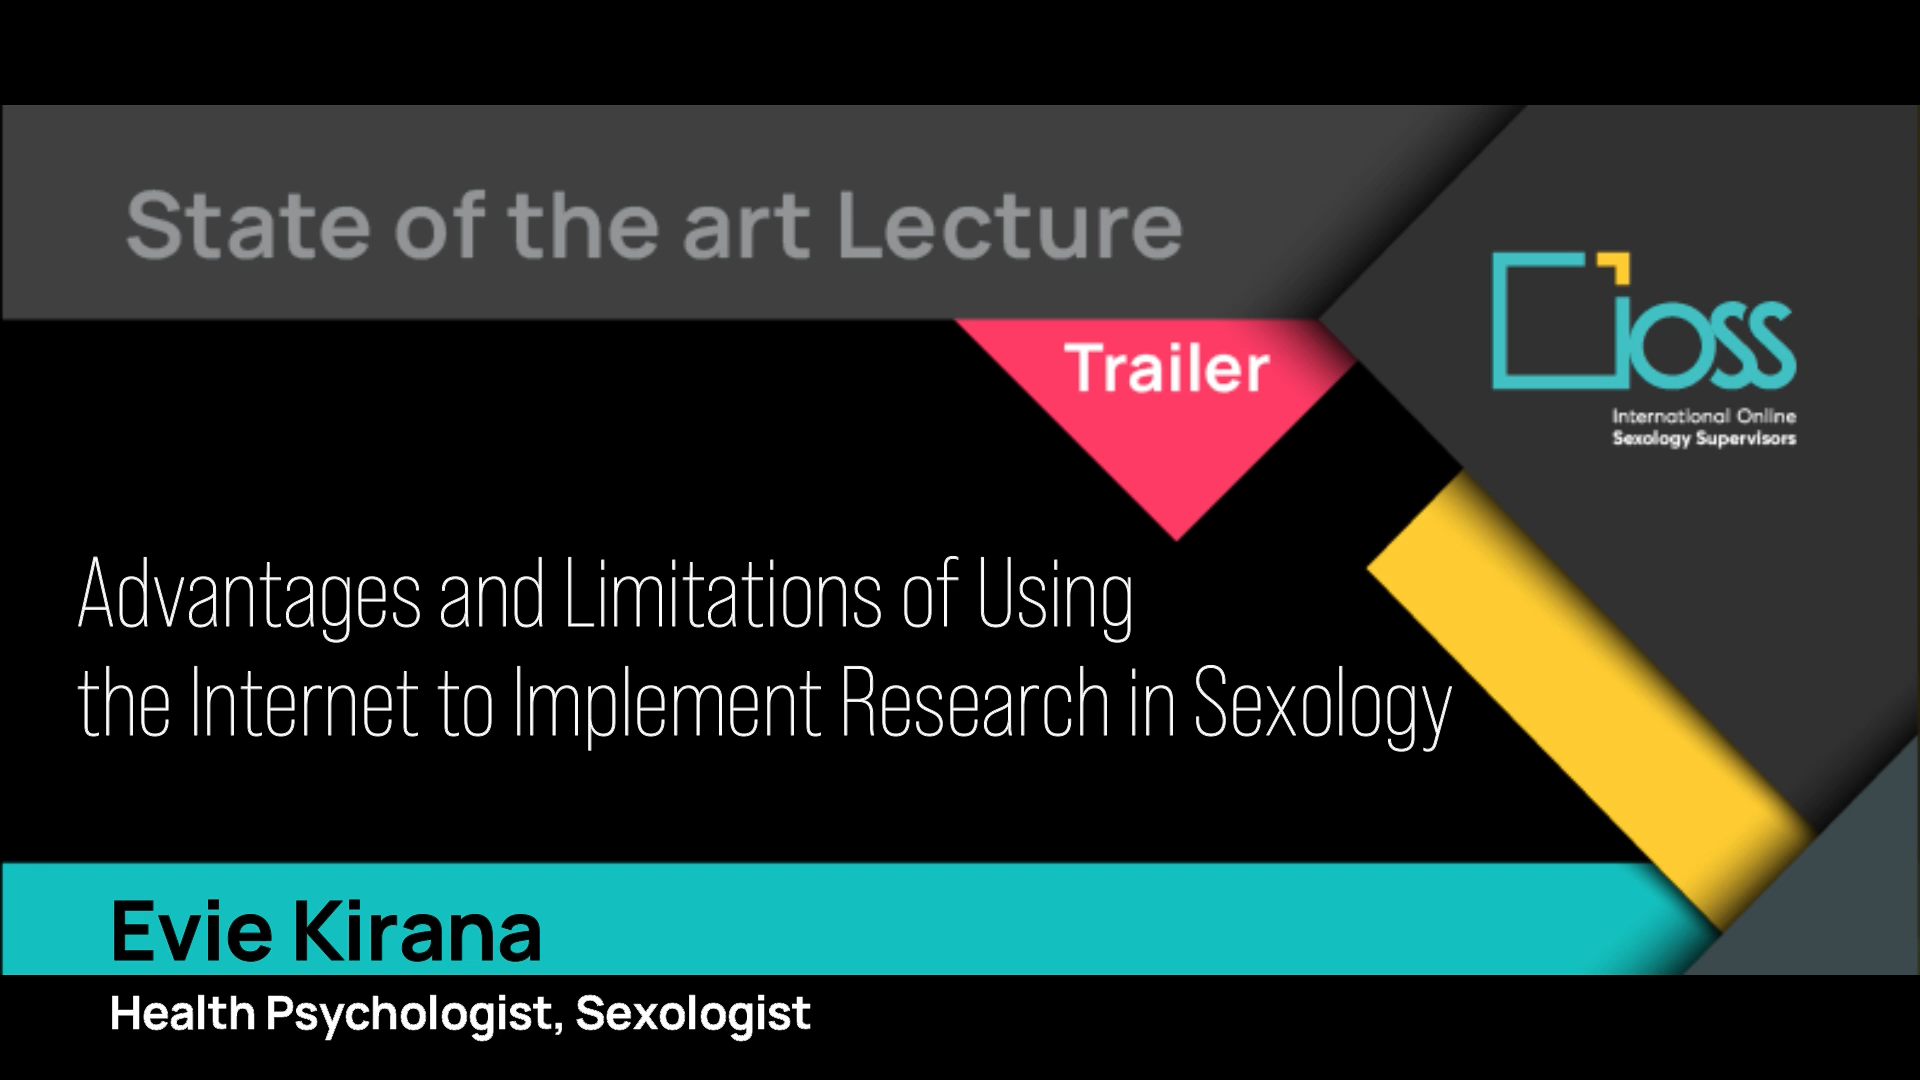 Trailer Advantages and Limitations of Using the Internet to Implement Research in Sexology